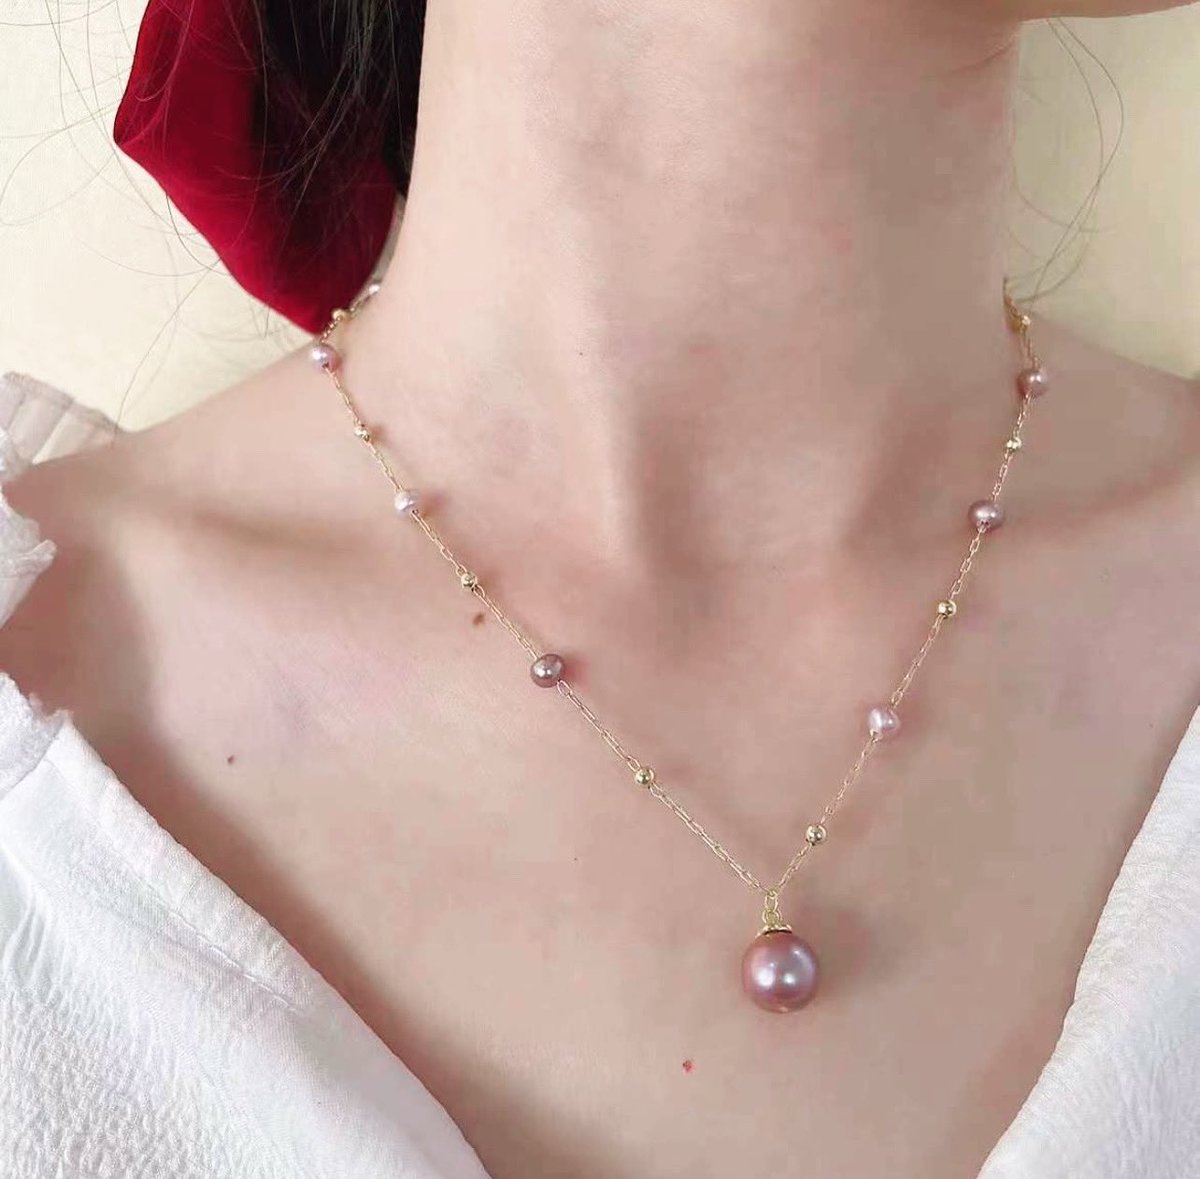 Starry night necklace- a must have to your jewelry collection.

#starrynight #jewelrycollection #musthavejewelry #necklaceoftheday #pearljewelry #pearlnecklace #pealrandgold #elegence #elegentjewellery #everydayjewelry